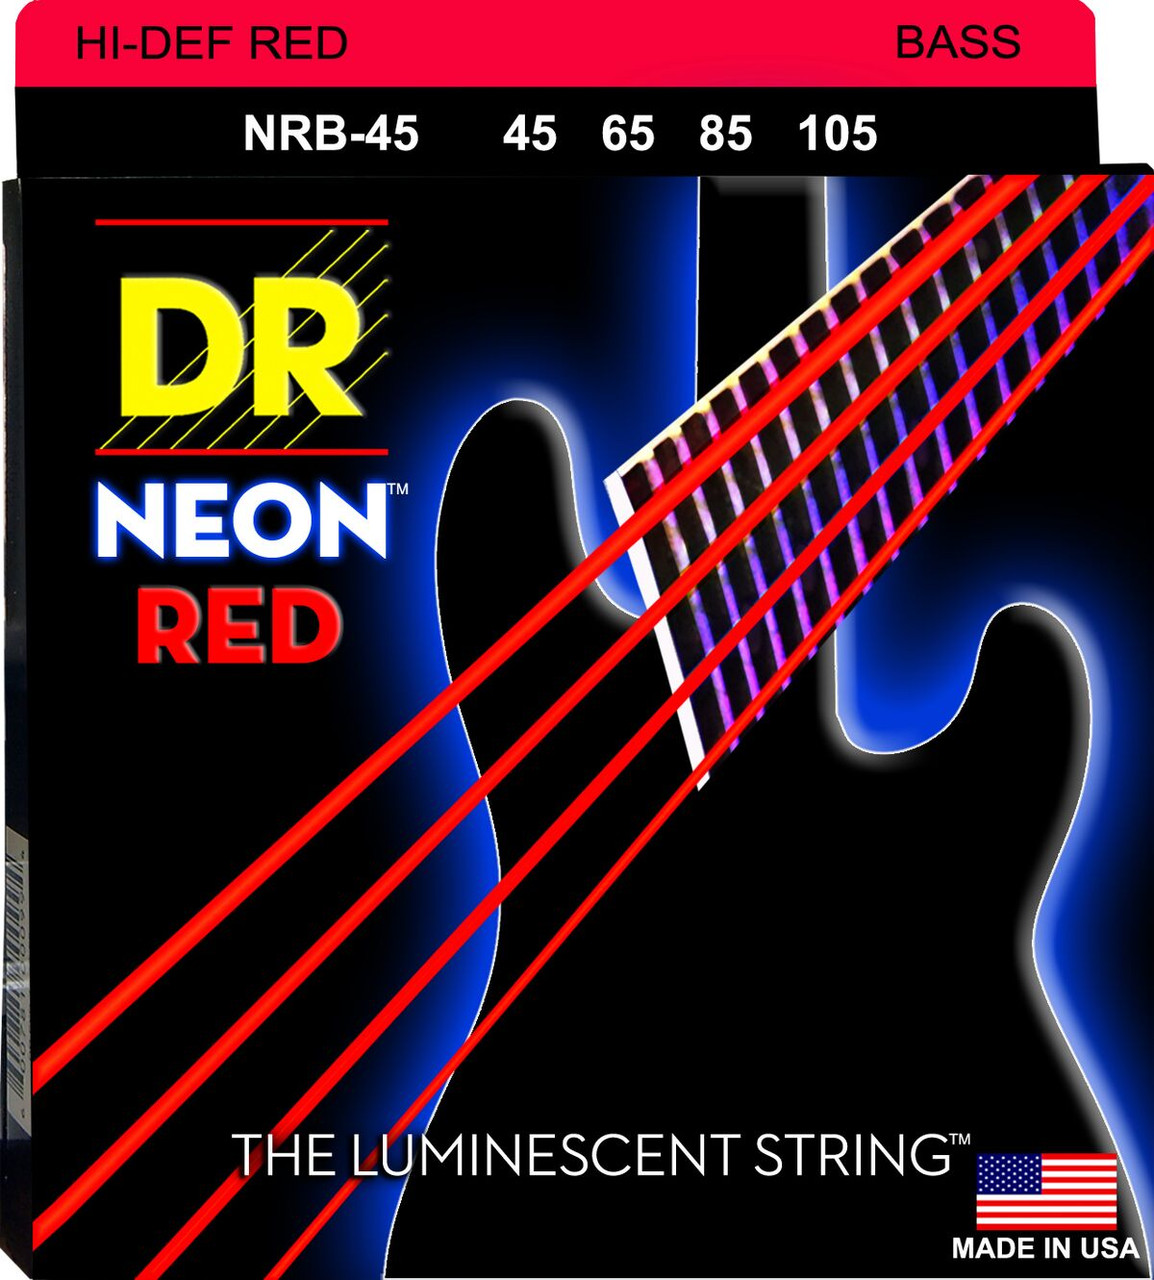 https://cdn11.bigcommerce.com/s-luvfwivmyi/images/stencil/1280x1280/products/19978/24254/dr-hi-def-neon-red-k3-coated-nickel-plated-bass-guitar-strings-nrb-45-4-string-45-105-med-13__69870.1657728014.jpg?c=1